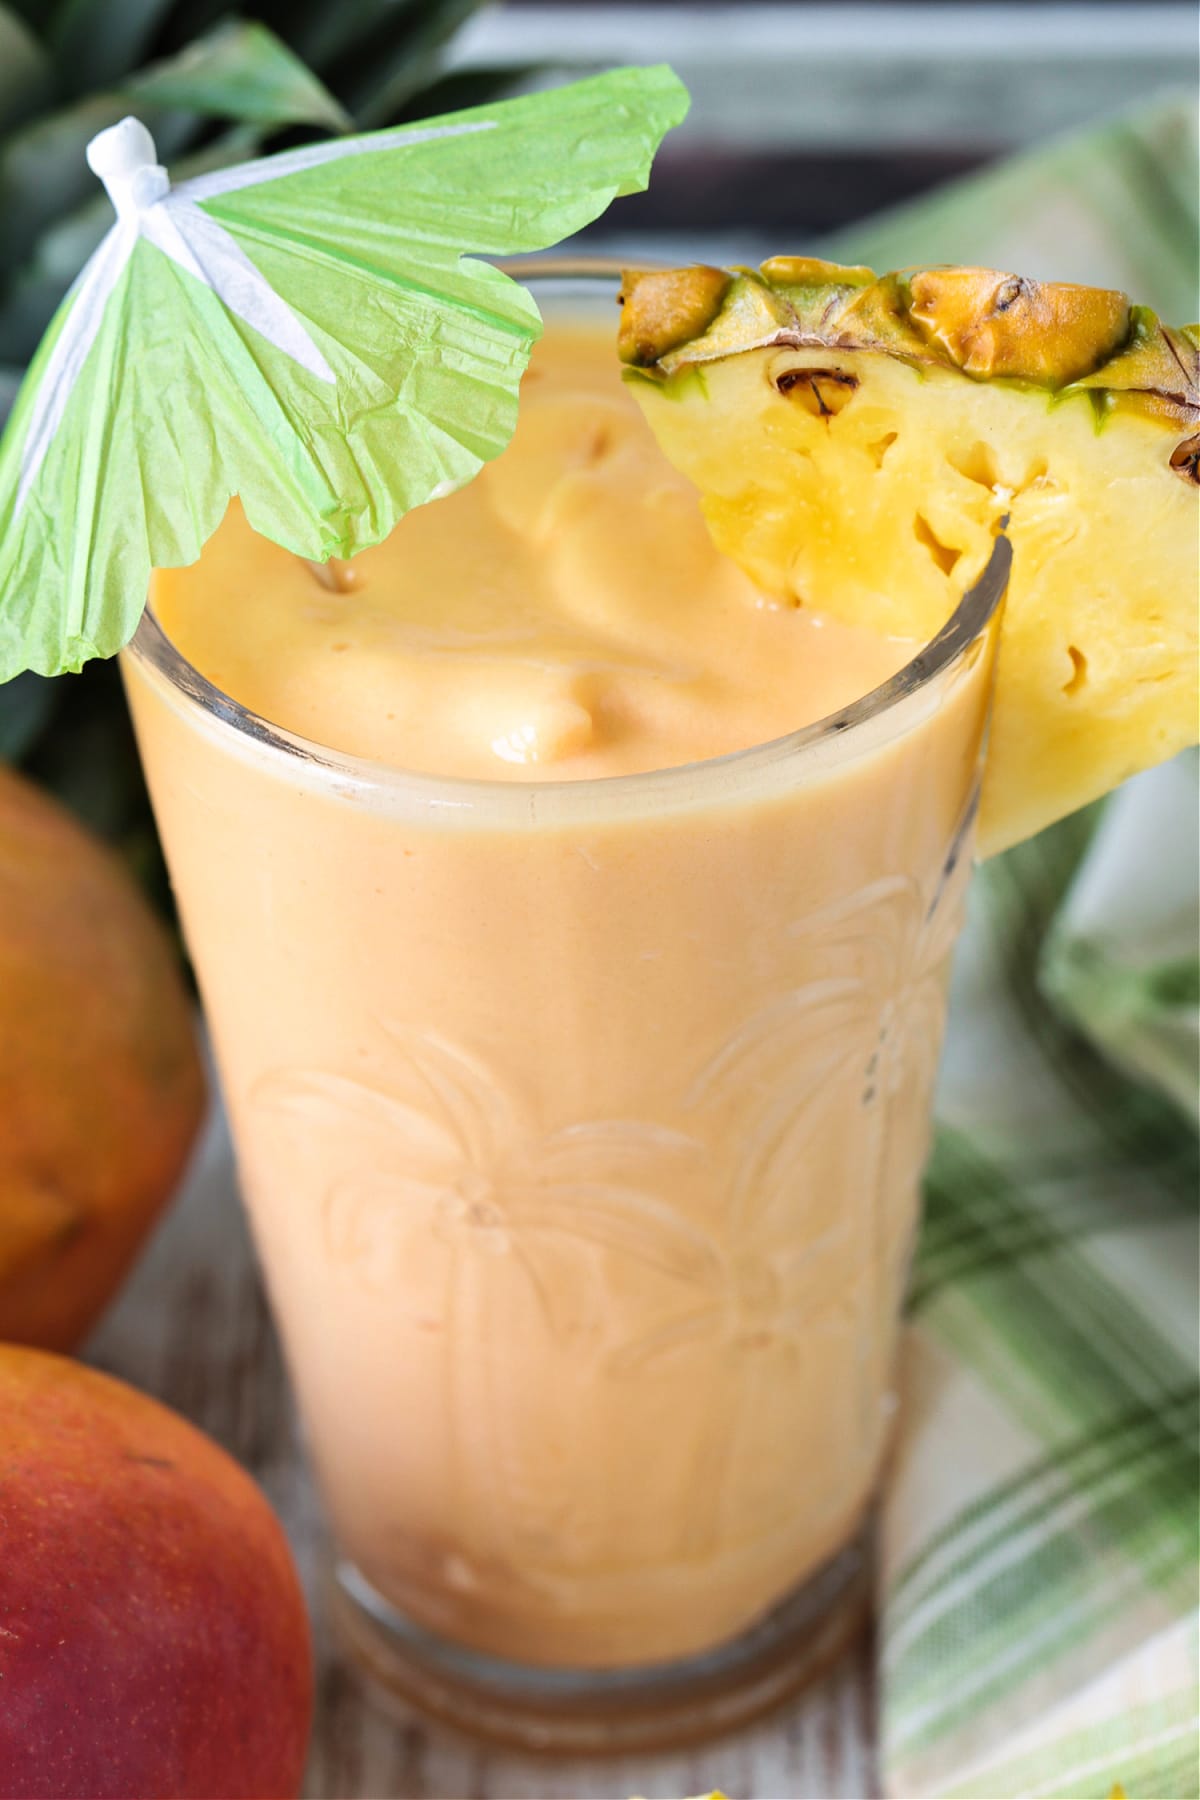 mango smoothie in glass with umbrella and fresh pineapple